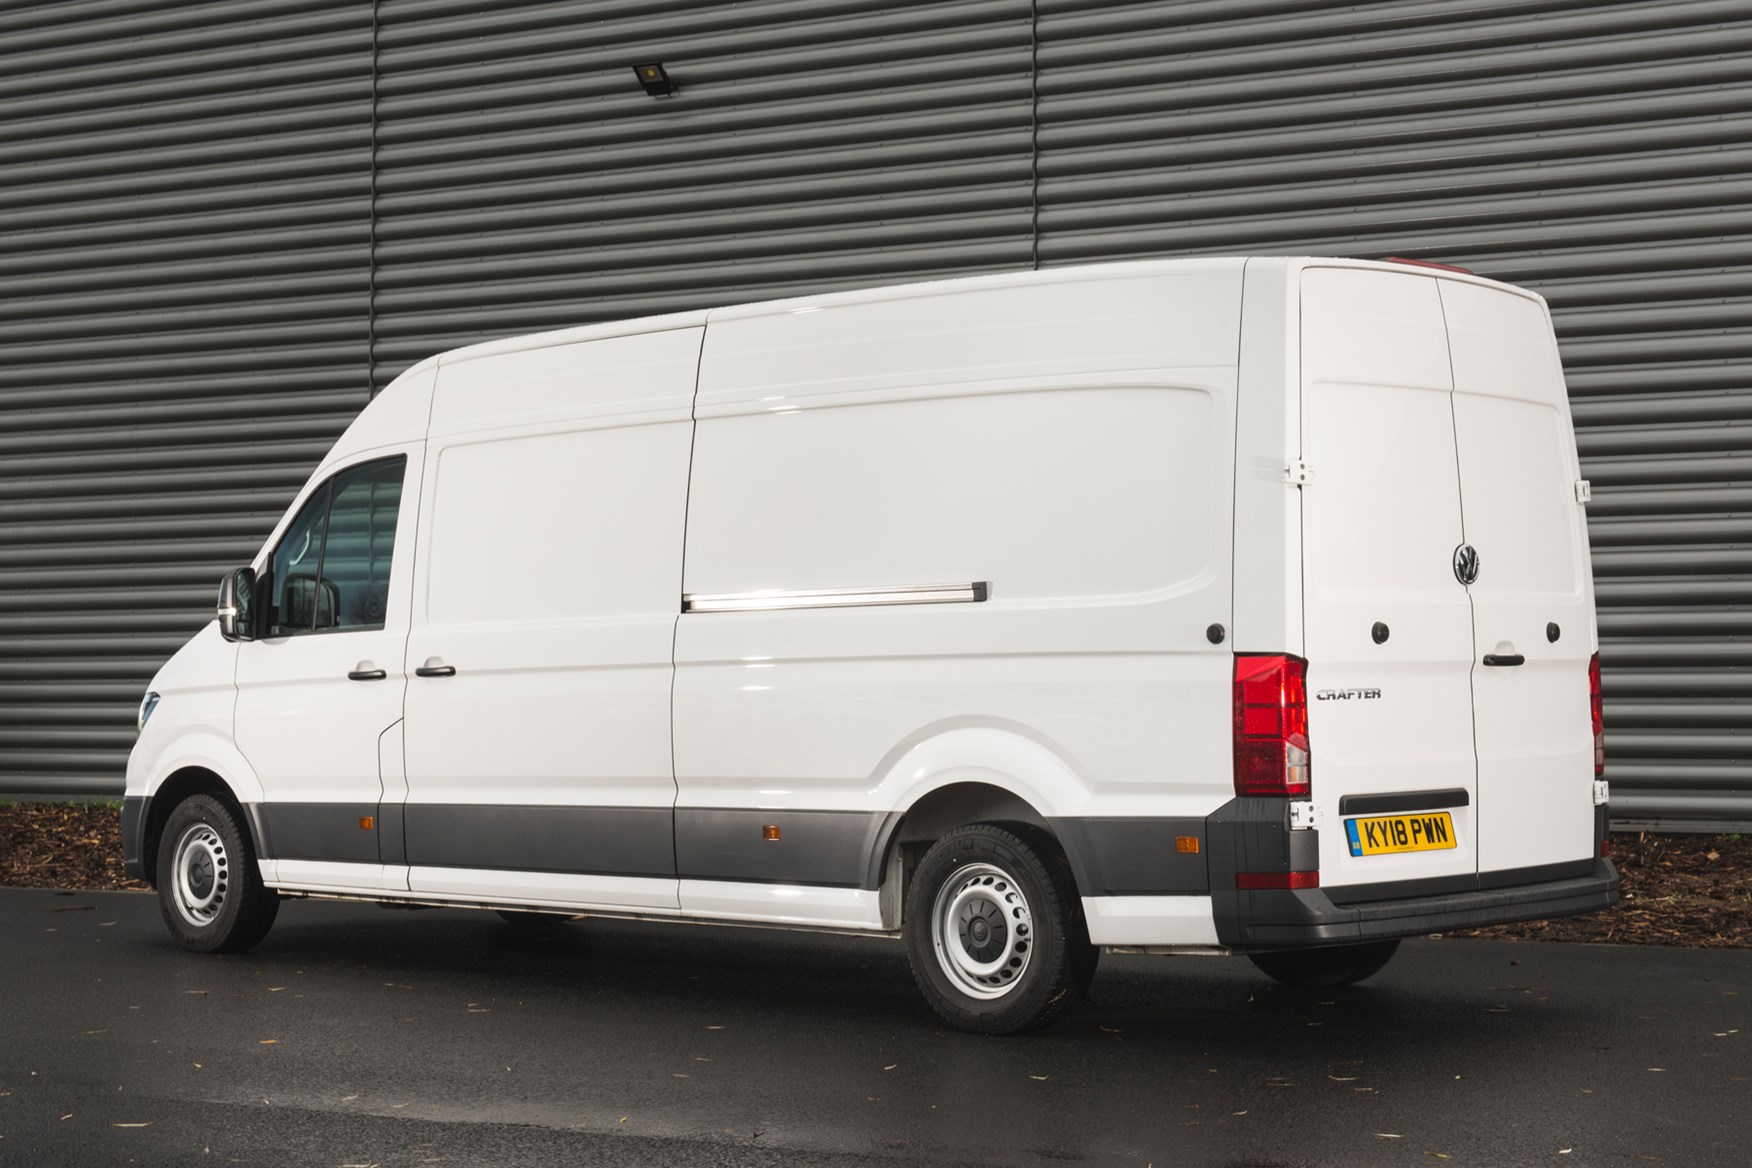 VW Crafter RWD long-wheelbase 140hp review